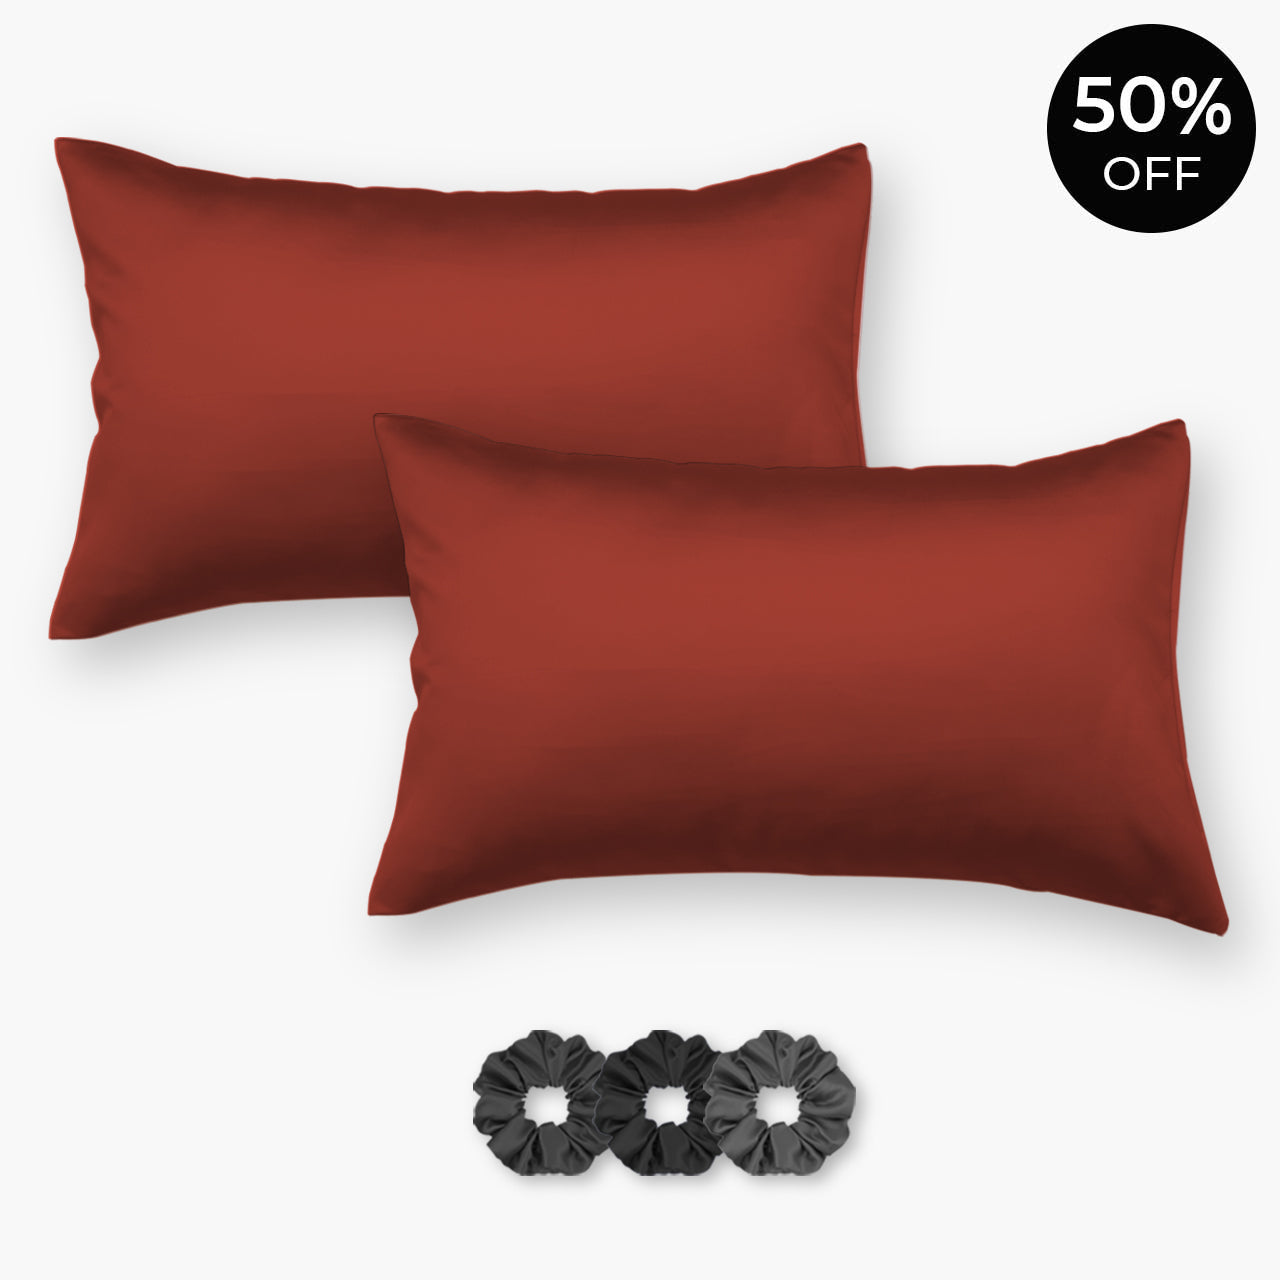 Rust Satin Pillowcases - Set of 2 (With 3 Free Scrunchies)